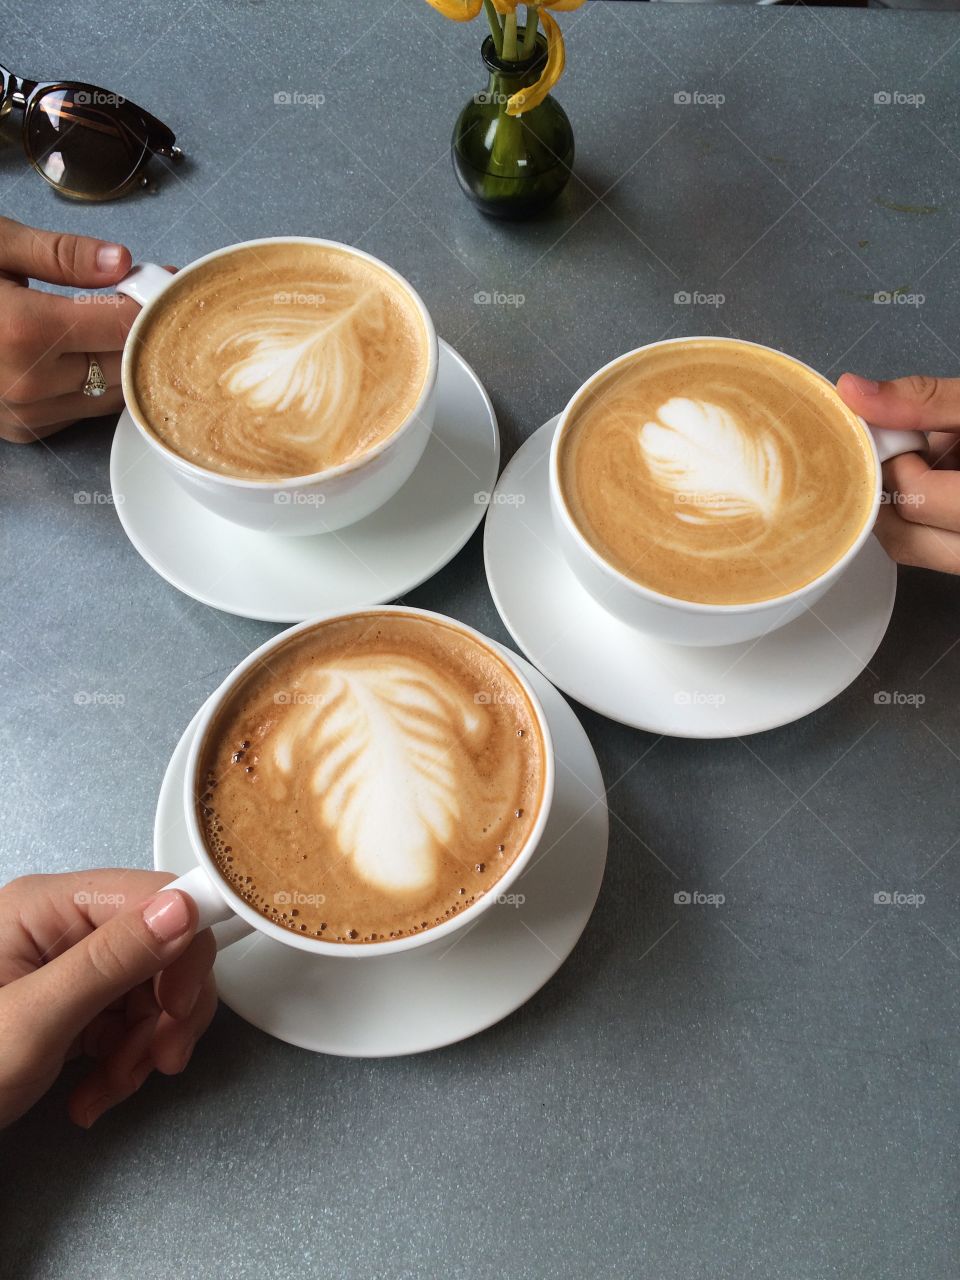 Three friends, chatting over beautiful honey lattes. Creamy latter art designs, each unique and intricate. 